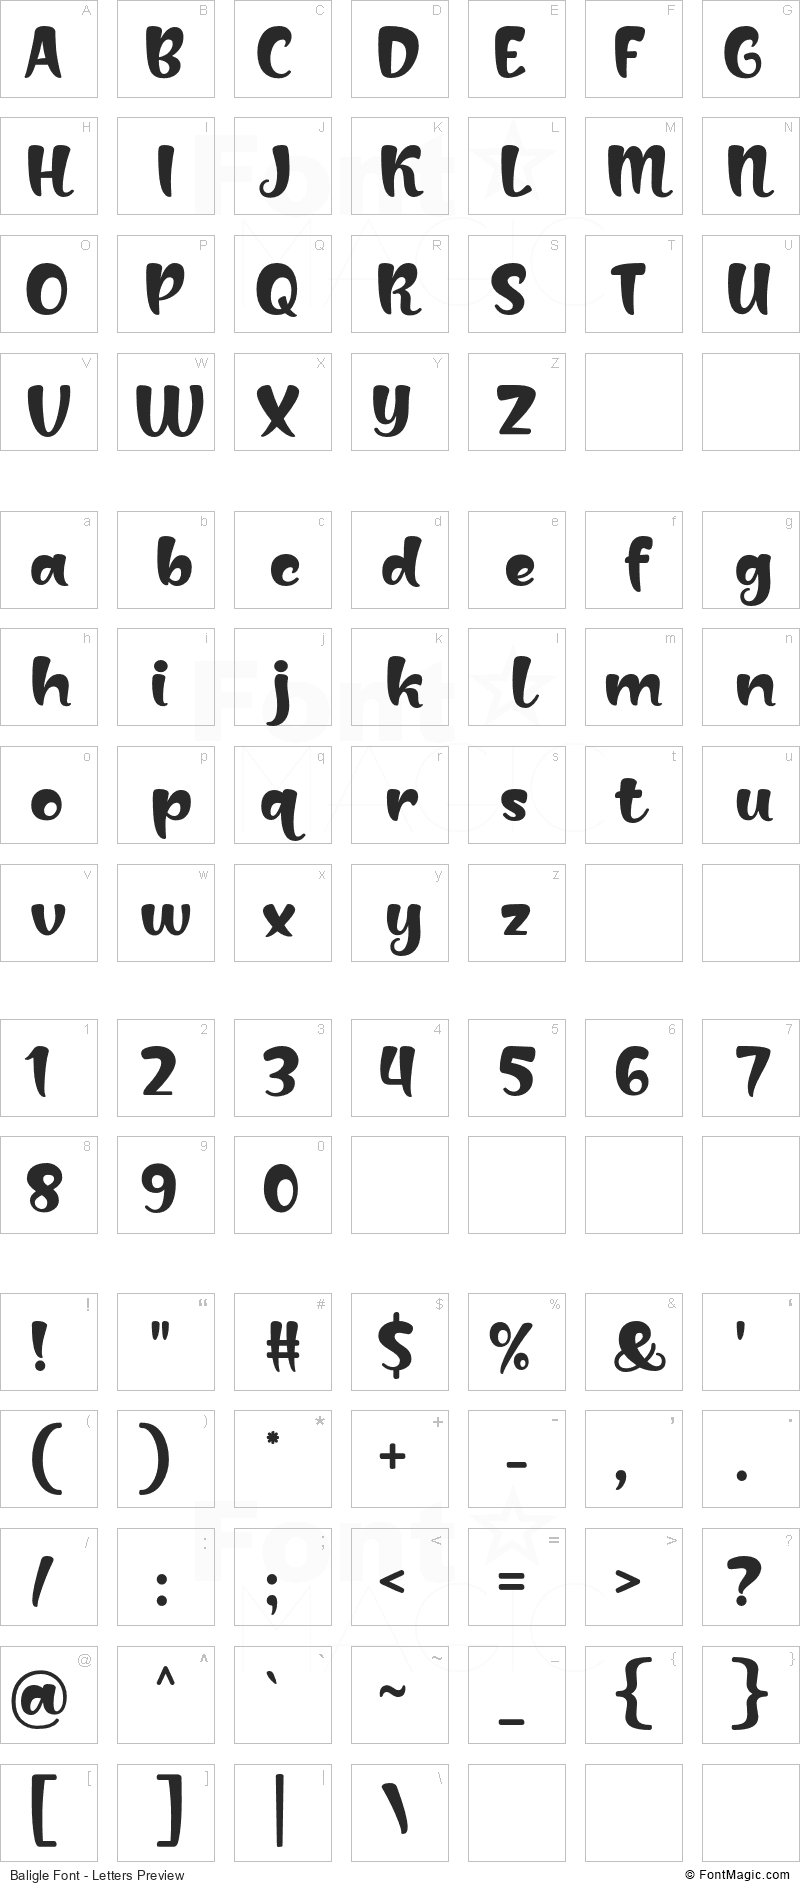 Baligle Font - All Latters Preview Chart